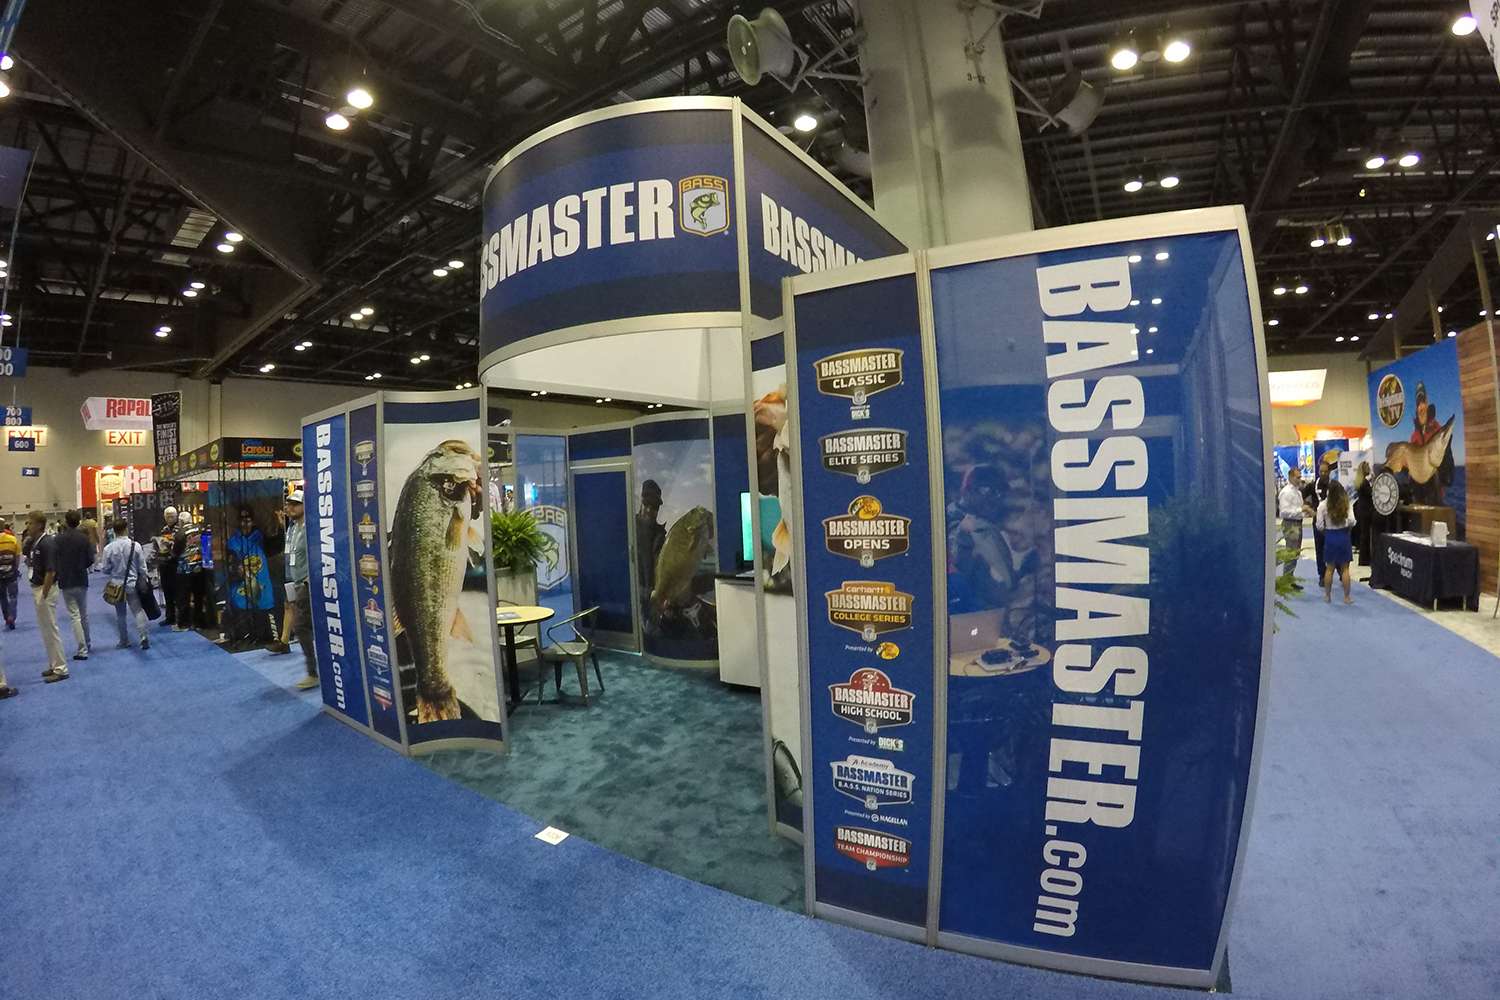 Here's an inside look at some of the booths that decorate the halls of ICAST 2018. To start, here is the brand new Bassmaster booth.